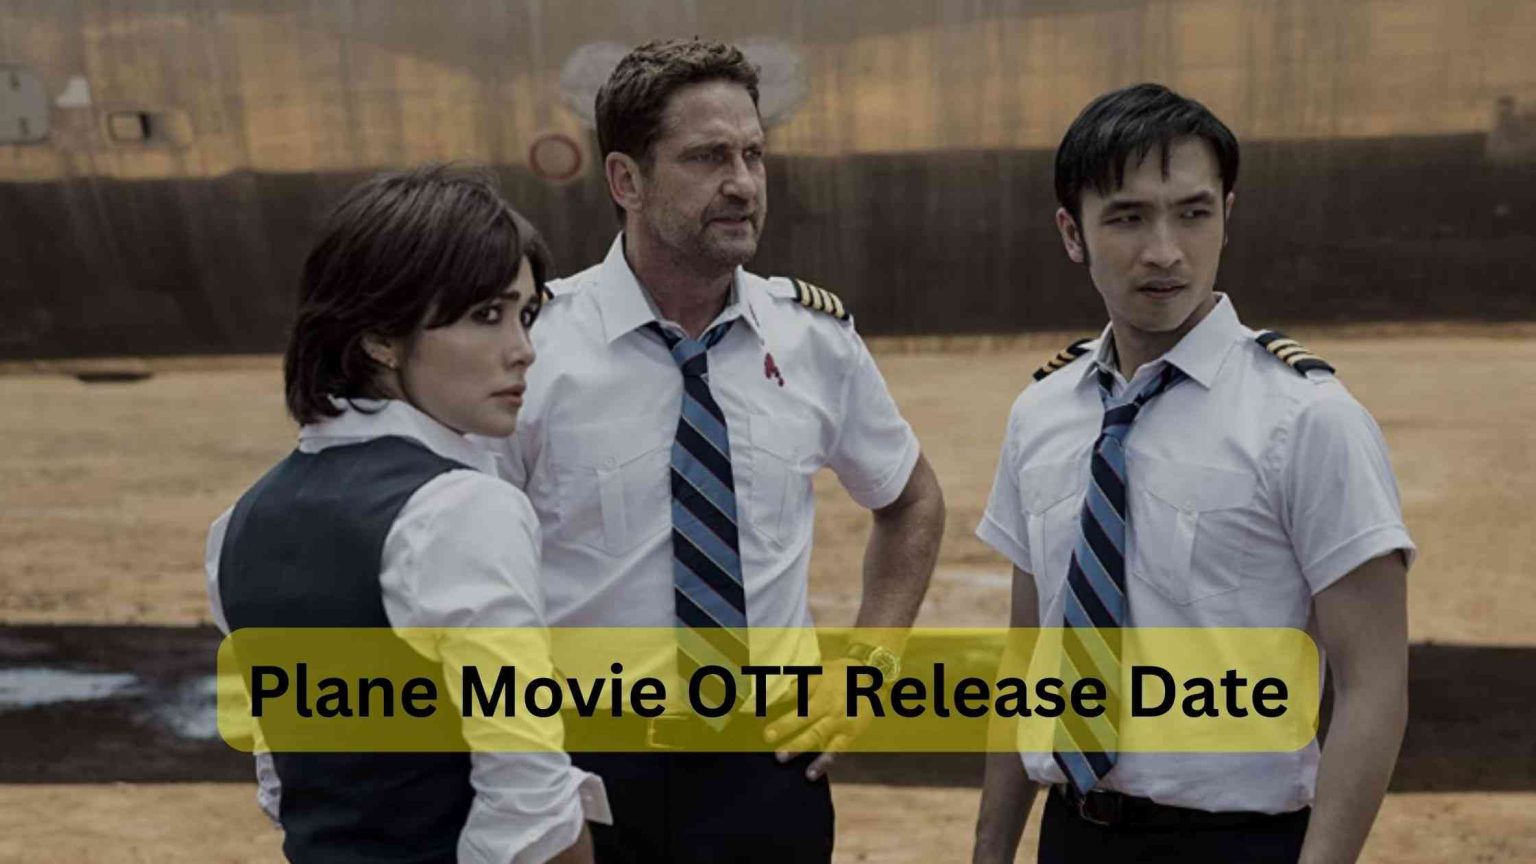 Plane Movie OTT Release Date Cast, Collections